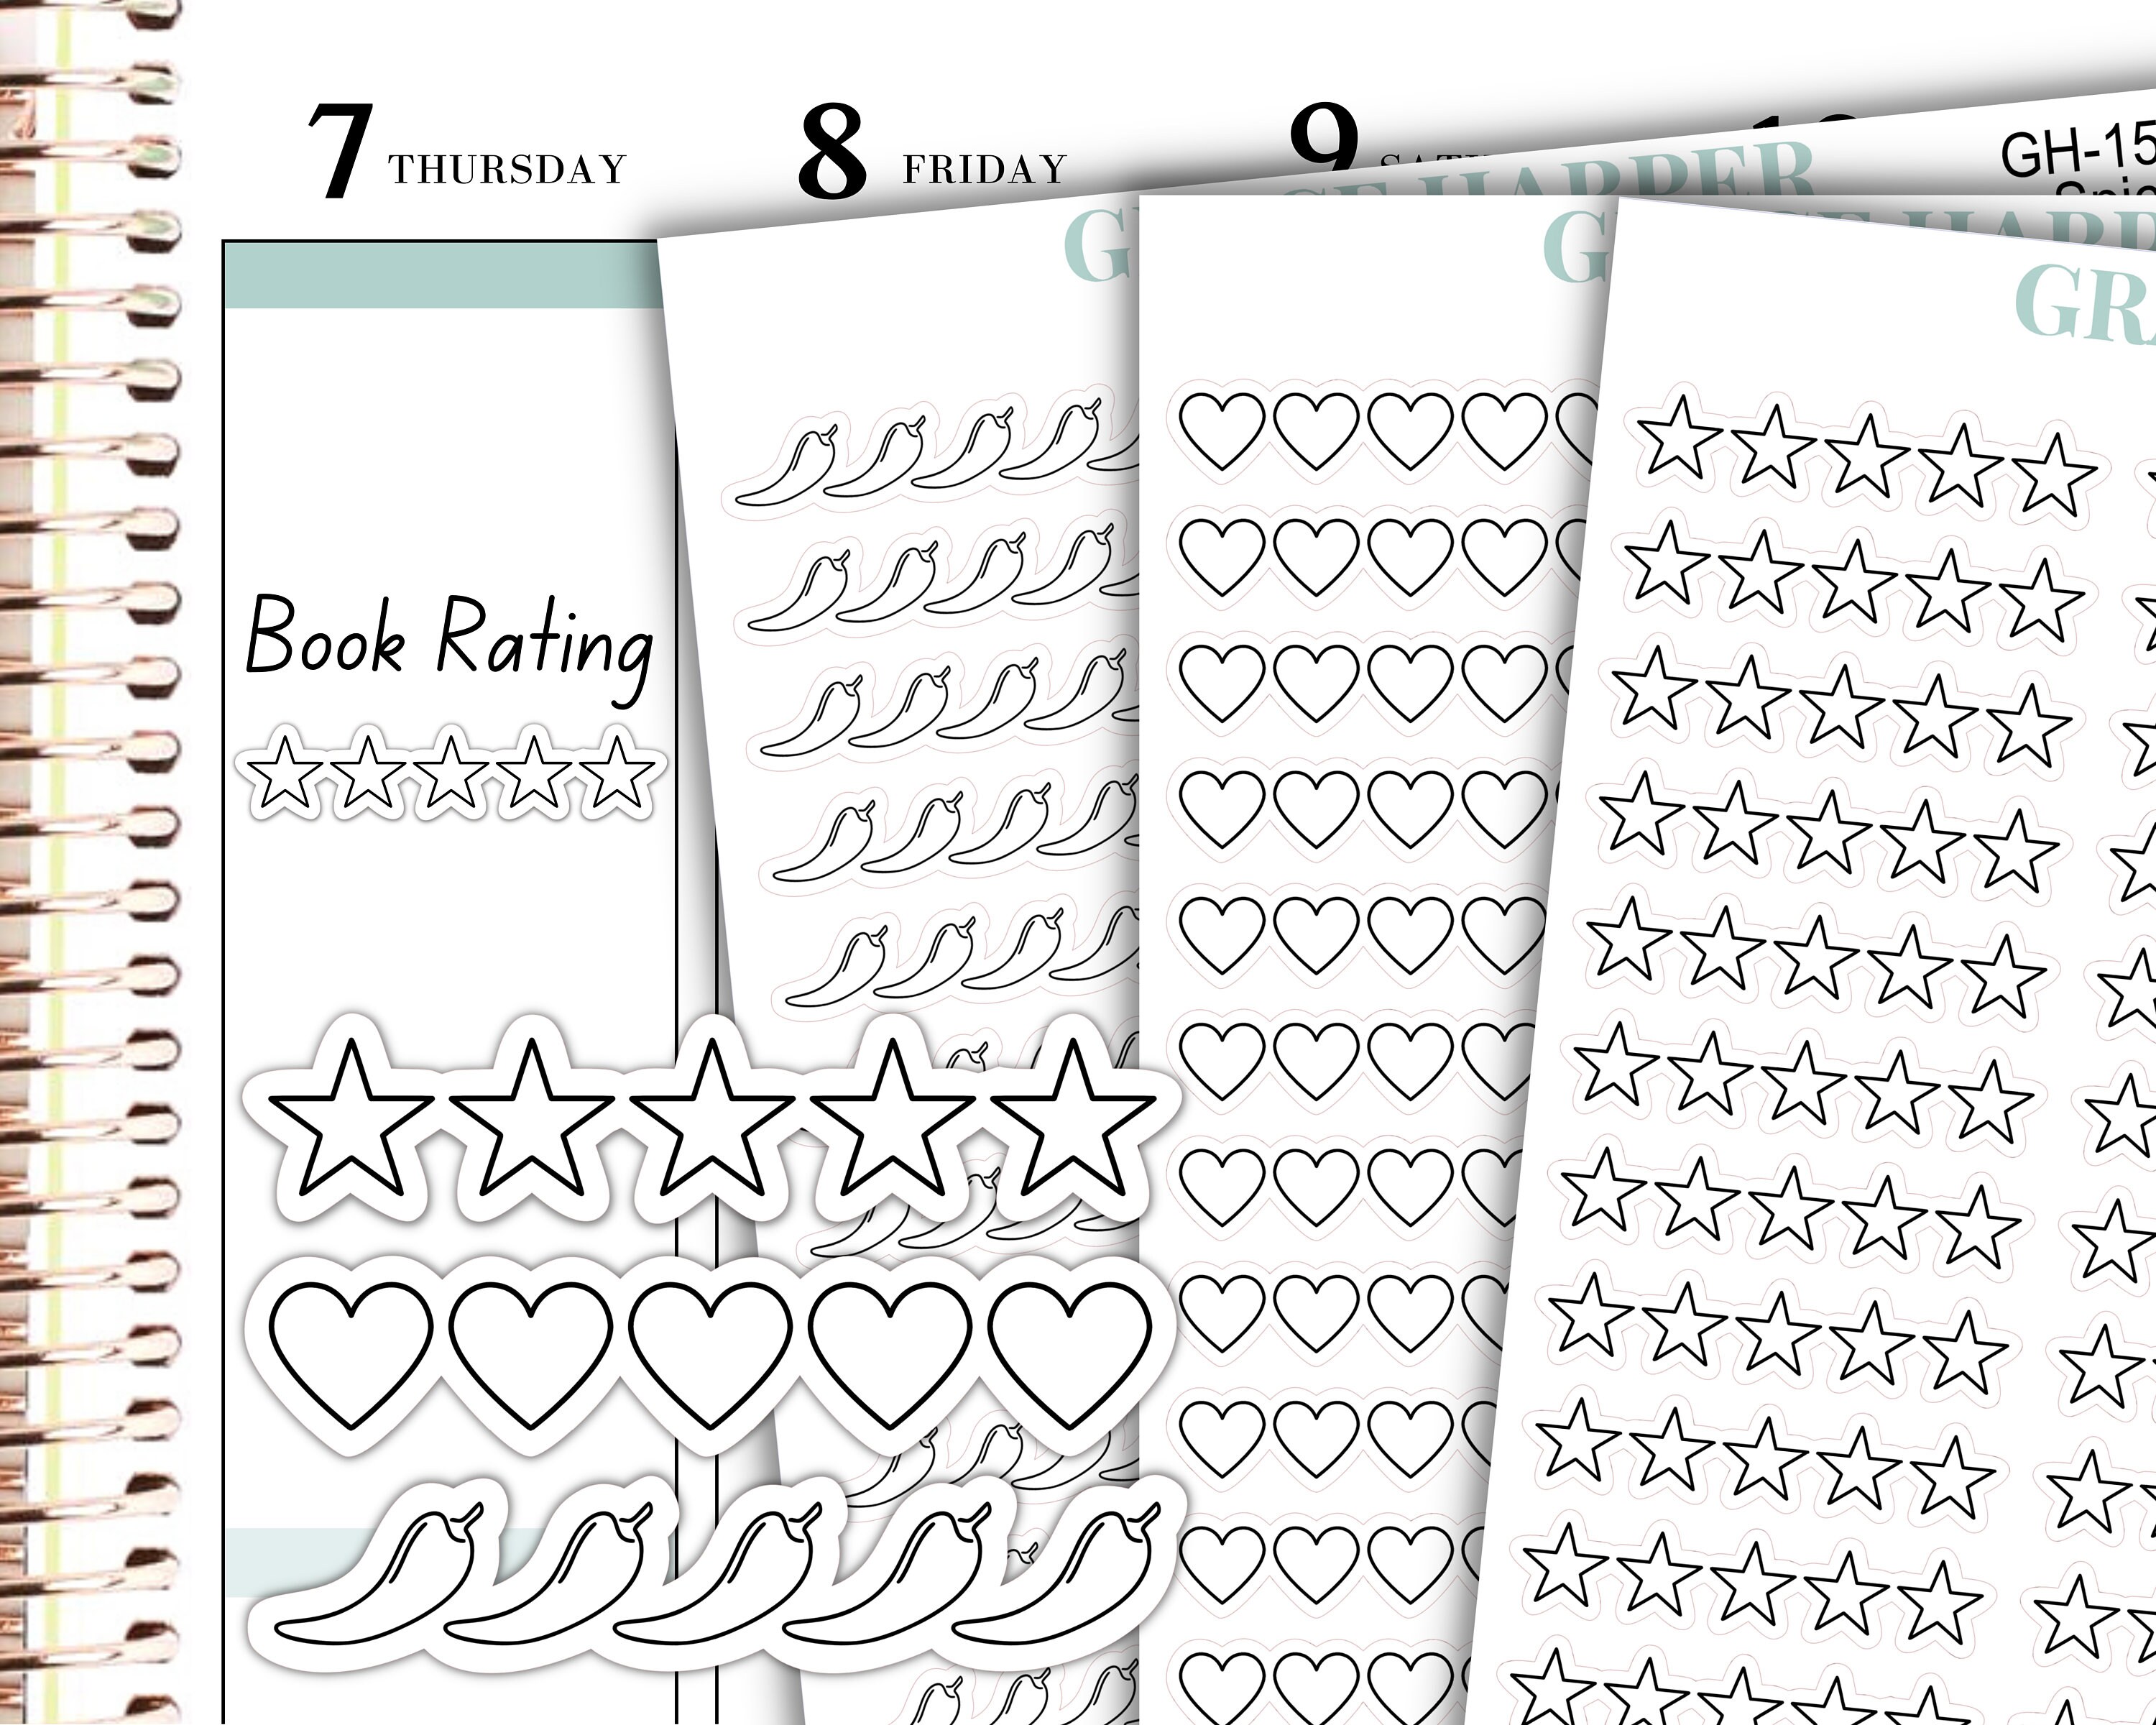 5 Star Rating Stamp, Bookish Stamps, Bullet Journal Stamps, Book Rating  Stamp, Bookplate, Planner Stamps, Rubber Stamp Creatiate